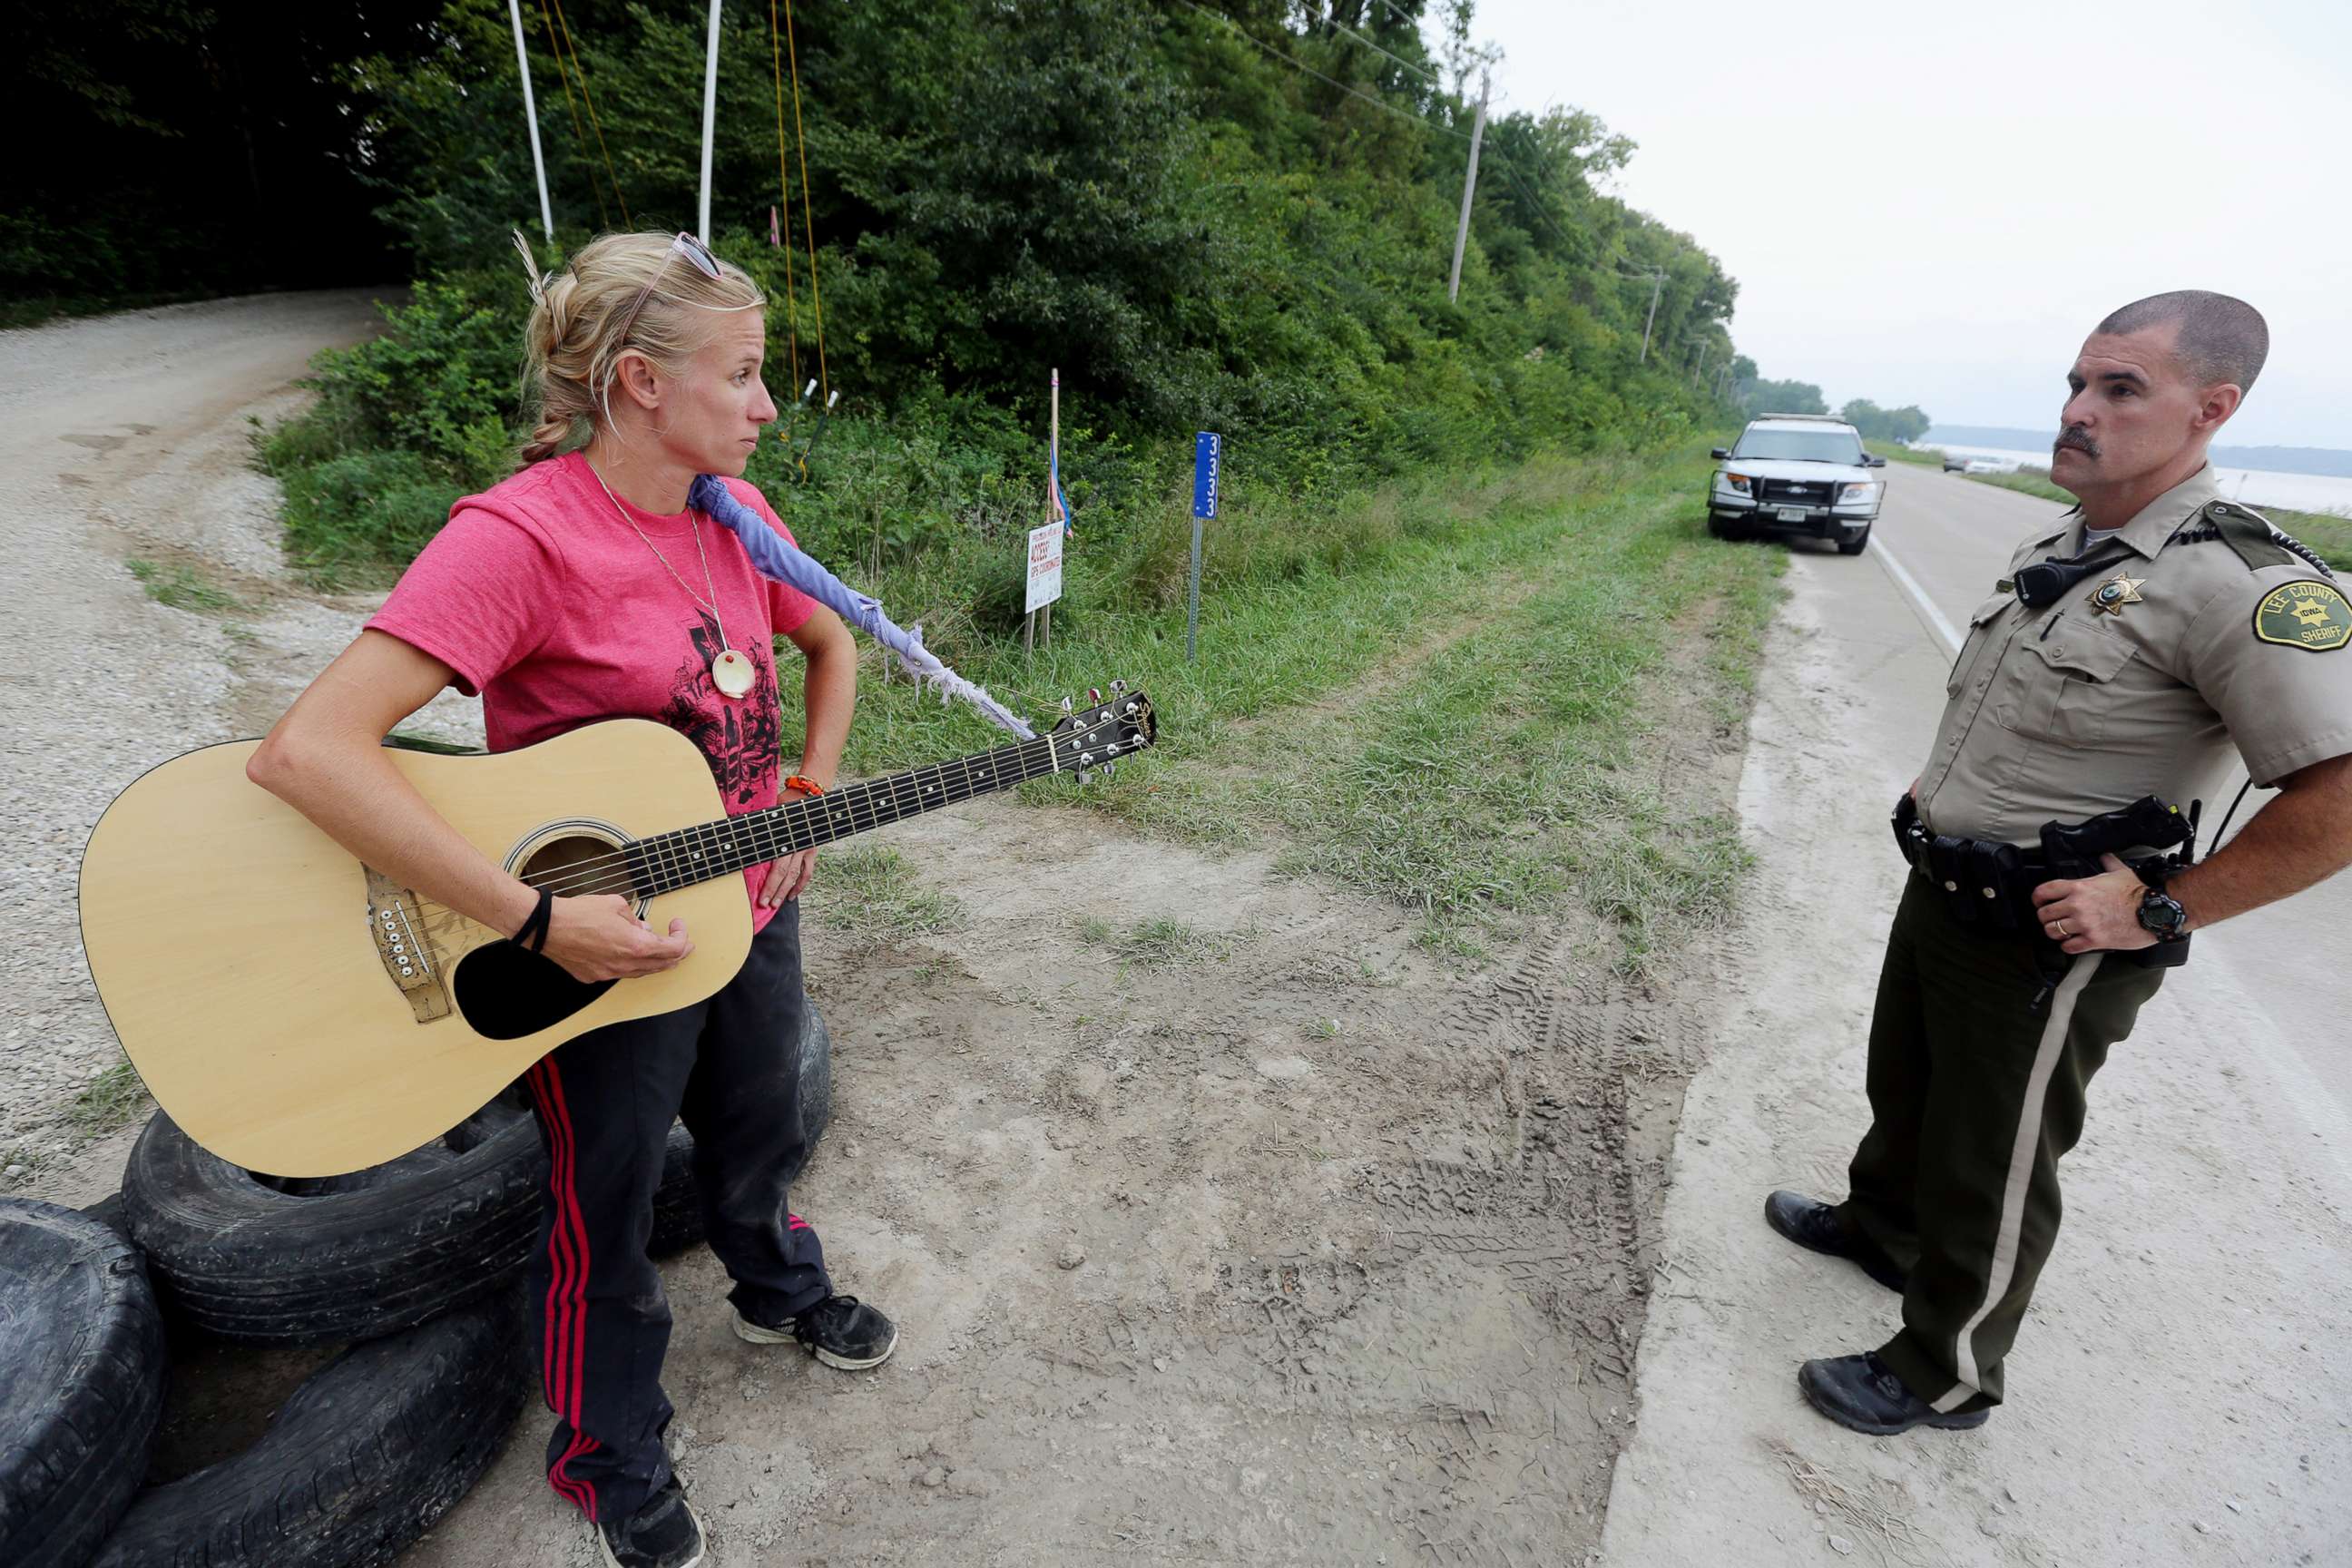 PHOTO: In this Aug. 30, 2016, file photo, activist Jessica Reznicek talks with Lee County Sheriff's Deputy Steve Sproul while conducting a personal occupation and protesting the Bakken pipeline, at a pipeline construction site, near Keokuk, Iowa.